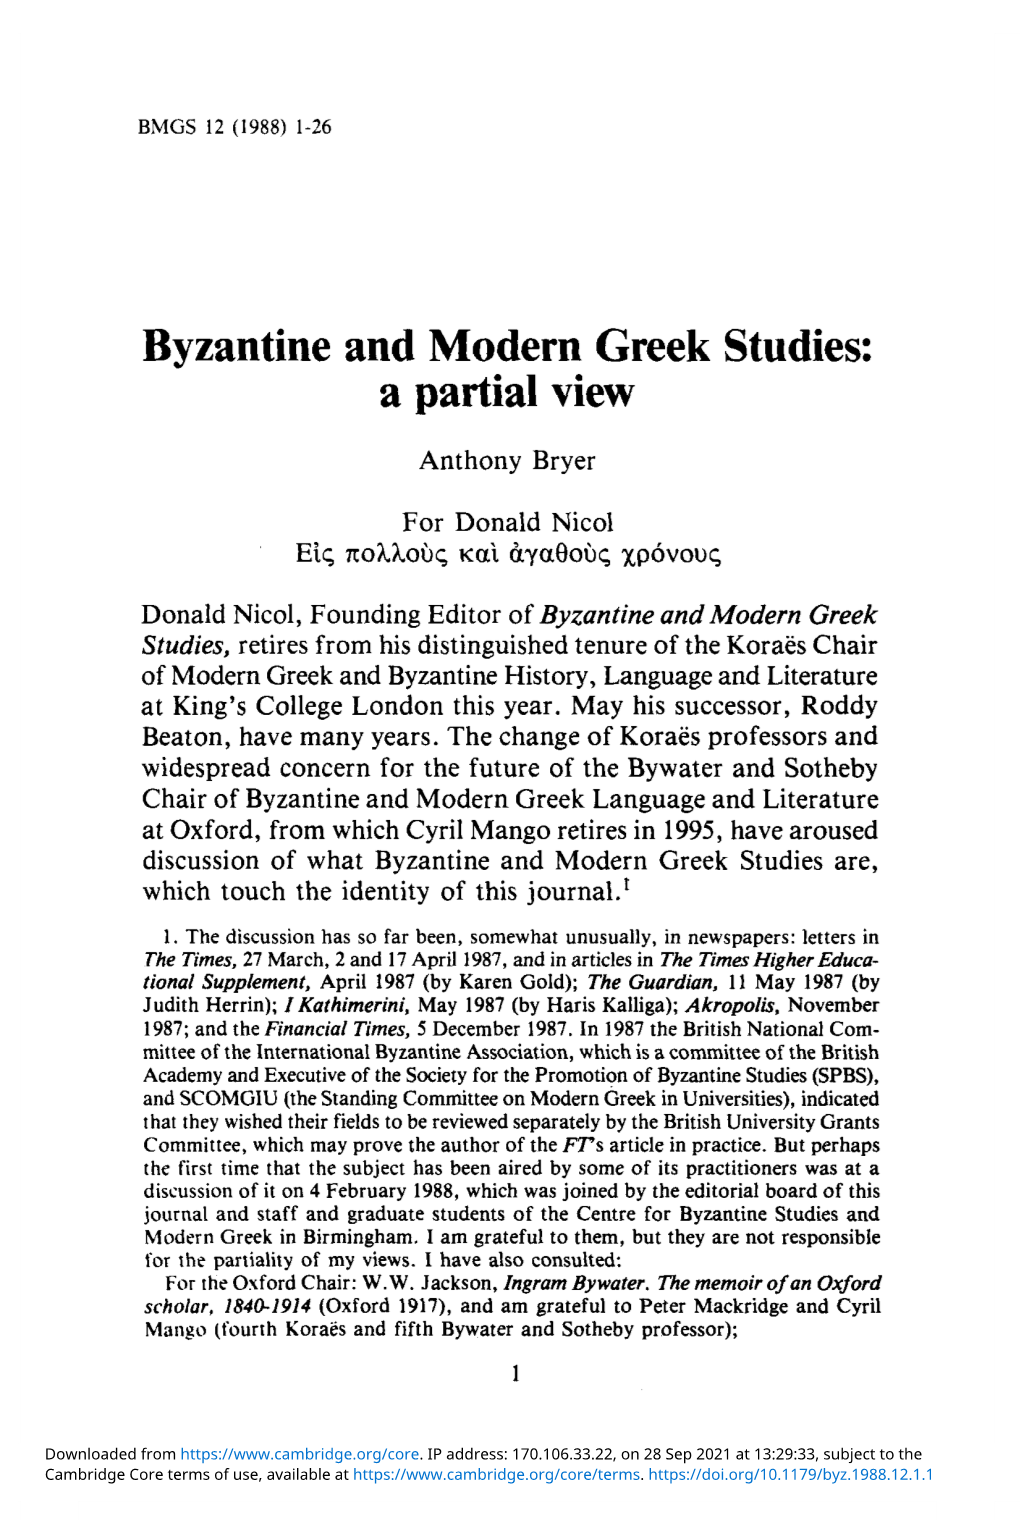 Byzantine and Modern Greek Studies: a Partial View